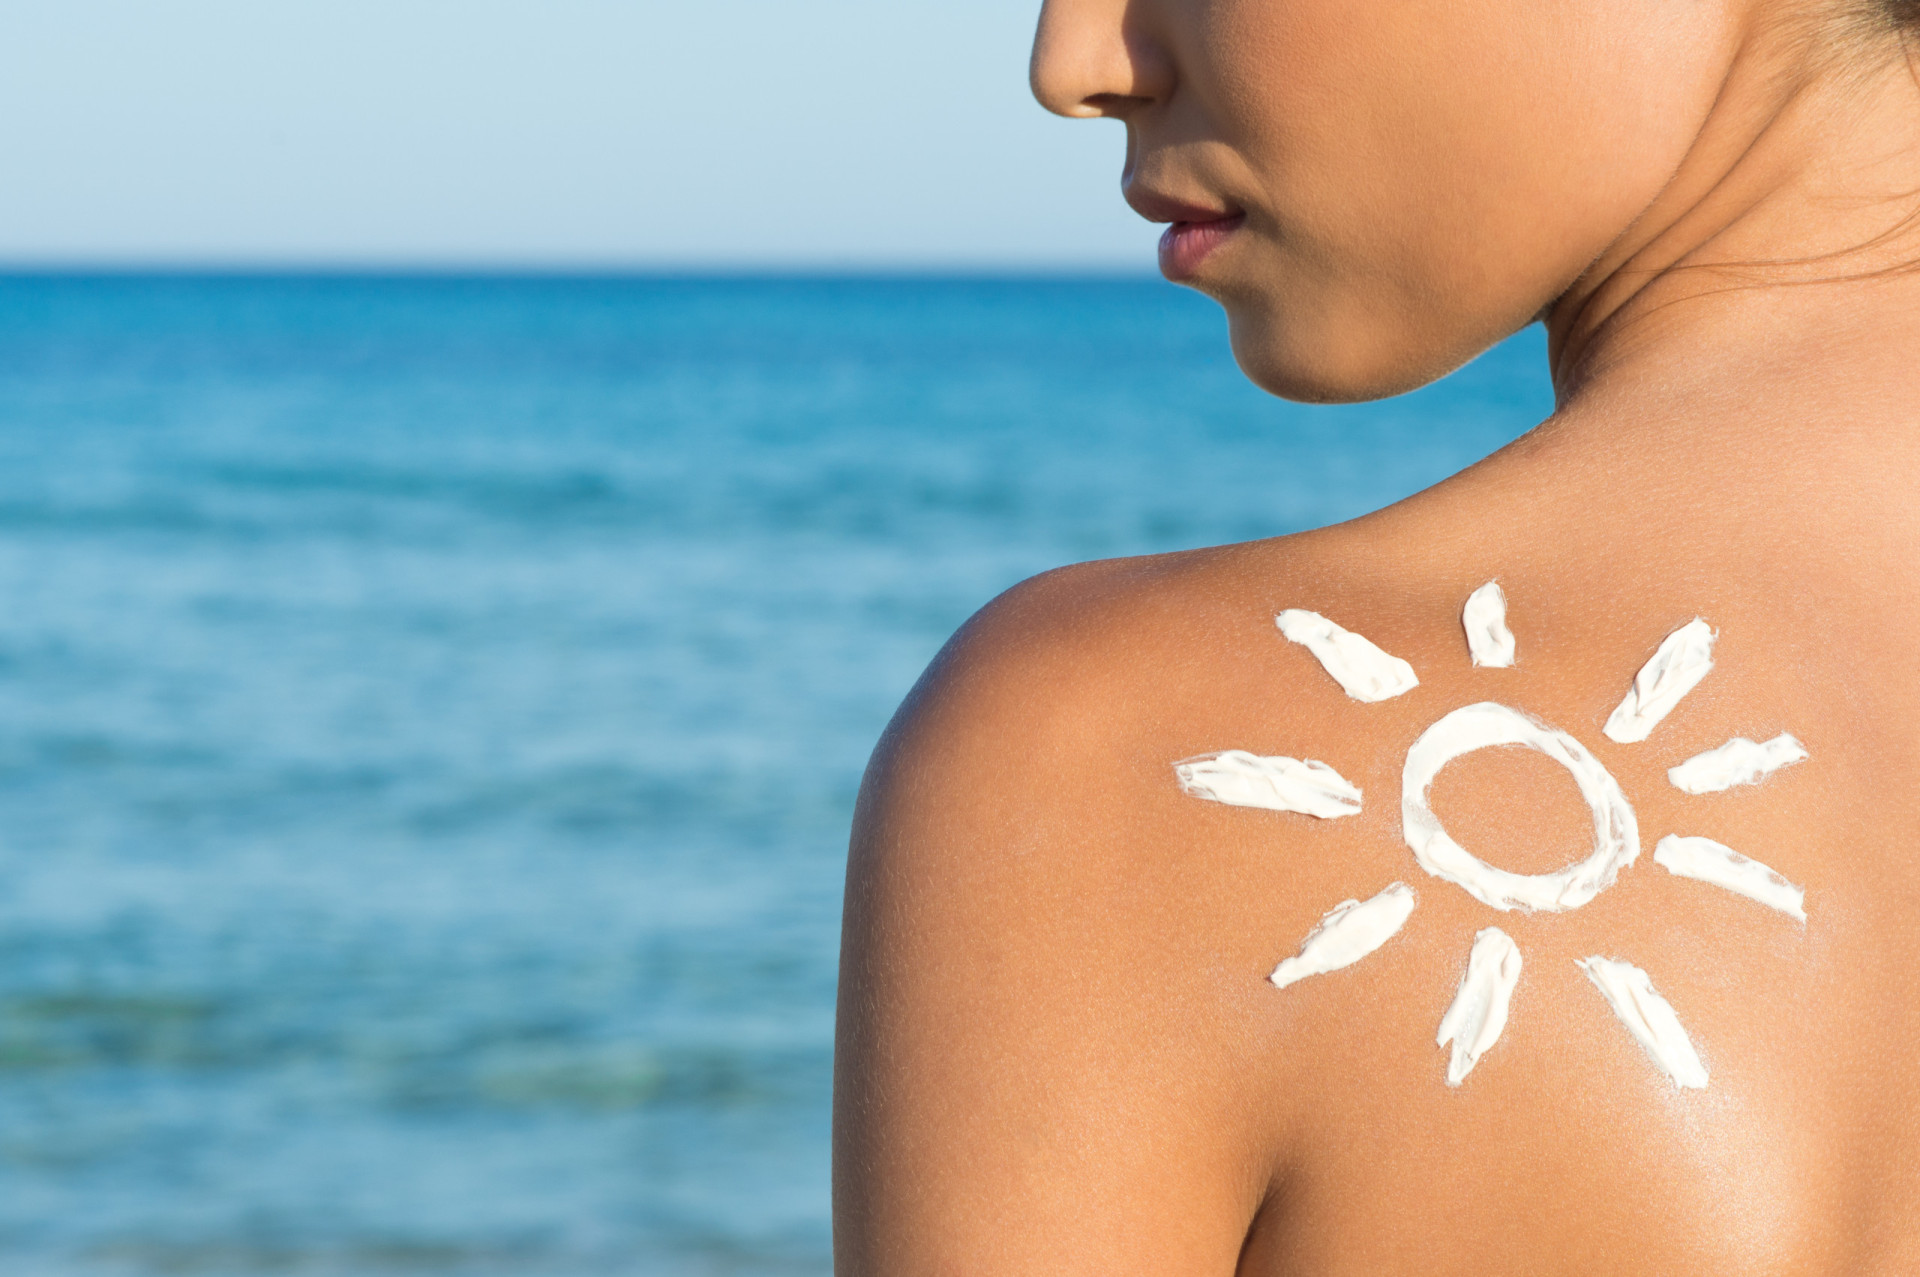 <p>Ultraviolet rays can be harmful and even cancerous in excessive amounts, but they're also to thank for our deep summer tans. Just make sure to wear your sunscreen!</p><p><a href="https://www.msn.com/en-us/community/channel/vid-7xx8mnucu55yw63we9va2gwr7uihbxwc68fxqp25x6tg4ftibpra?cvid=94631541bc0f4f89bfd59158d696ad7e">Follow us and access great exclusive content every day</a></p>